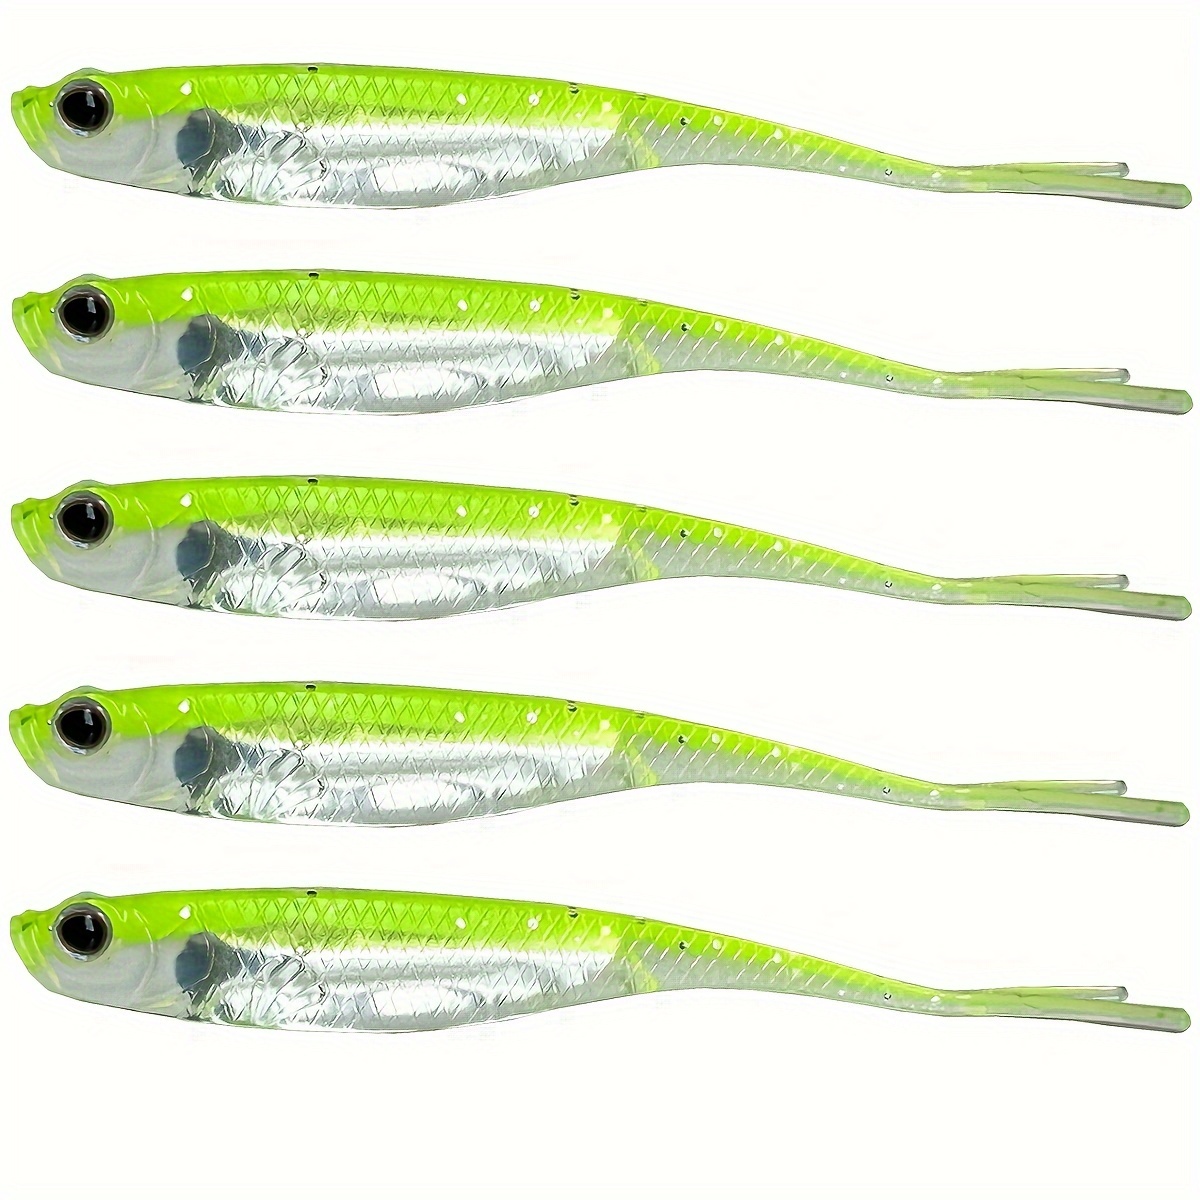 5 Pack Fishing Lure for Bass Lifelike Silicone Goby Soft Baits attractants  Swimbaits Trout Crappie Lures 0 33oz 3inch, Nature